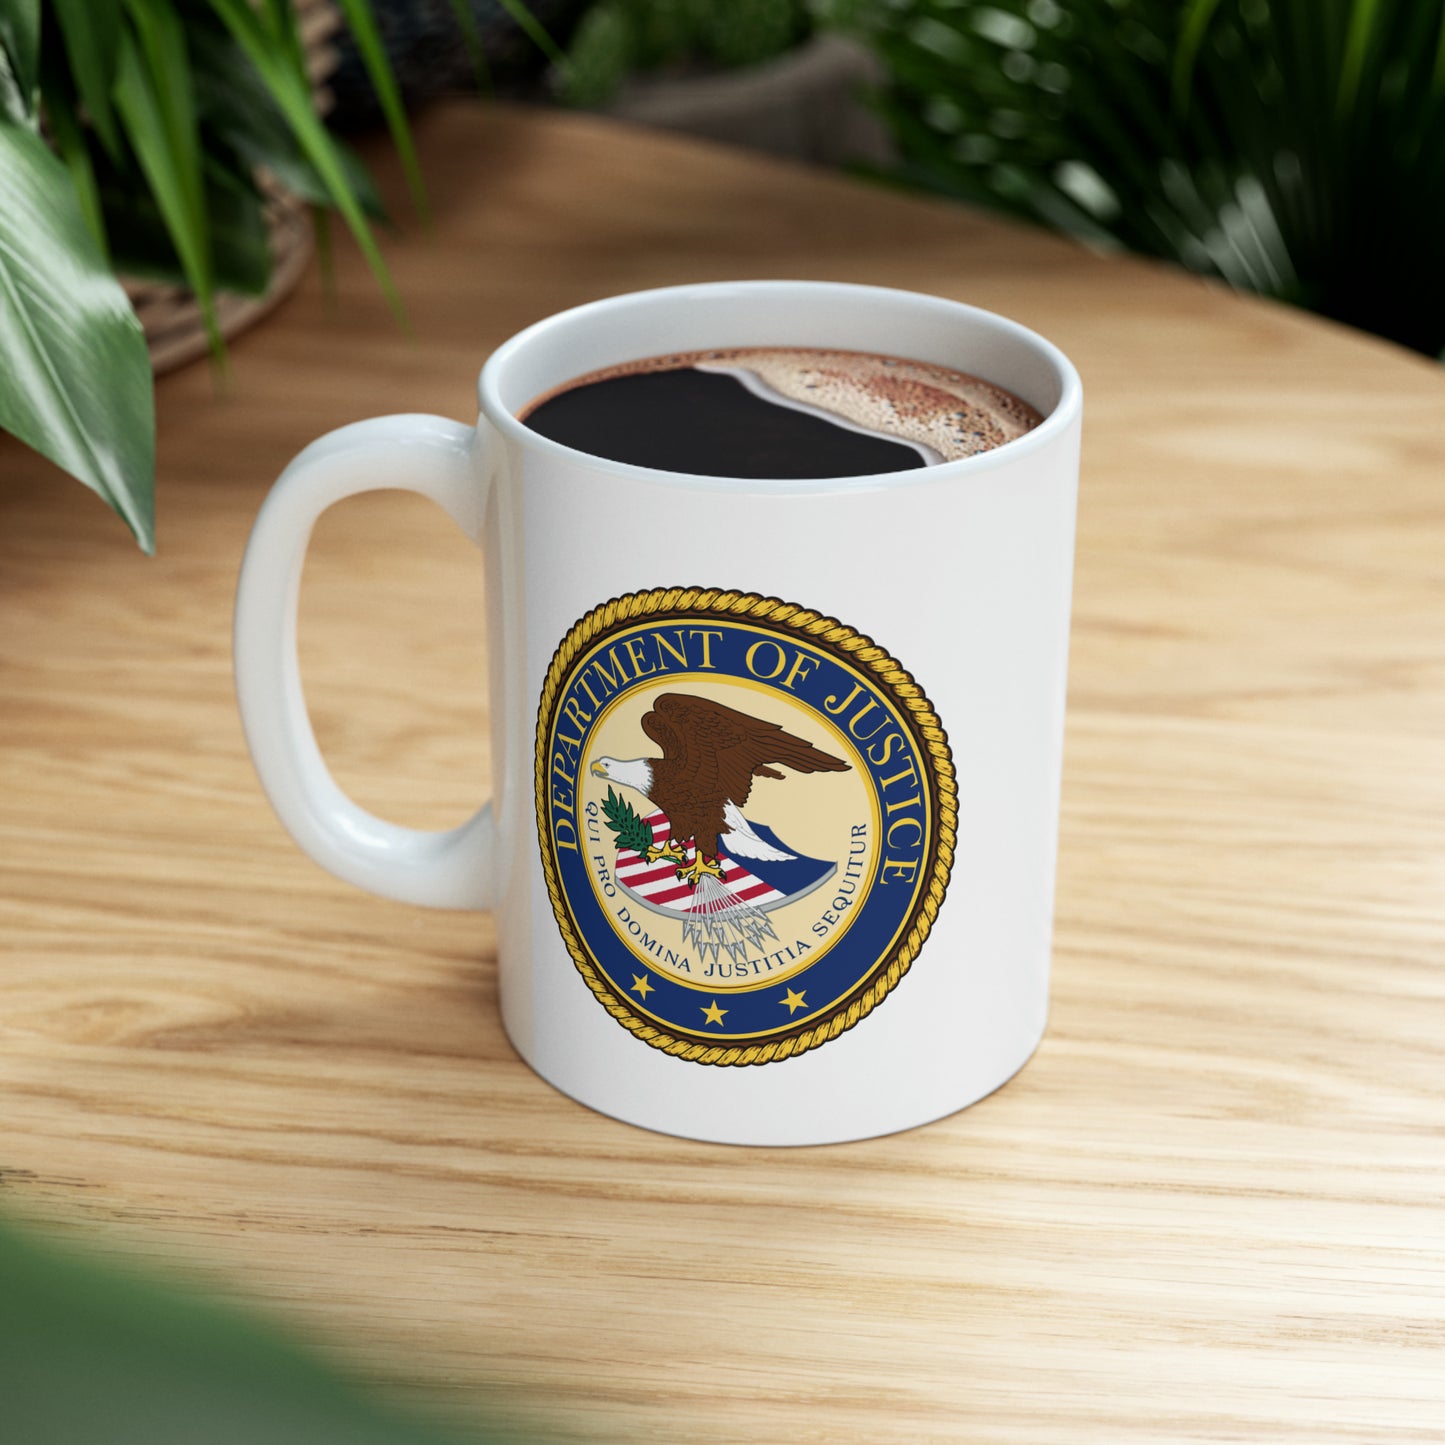 Department of Justice Coffee Mug - Double Sided White Ceramic 11oz by TheGlassyLass.com